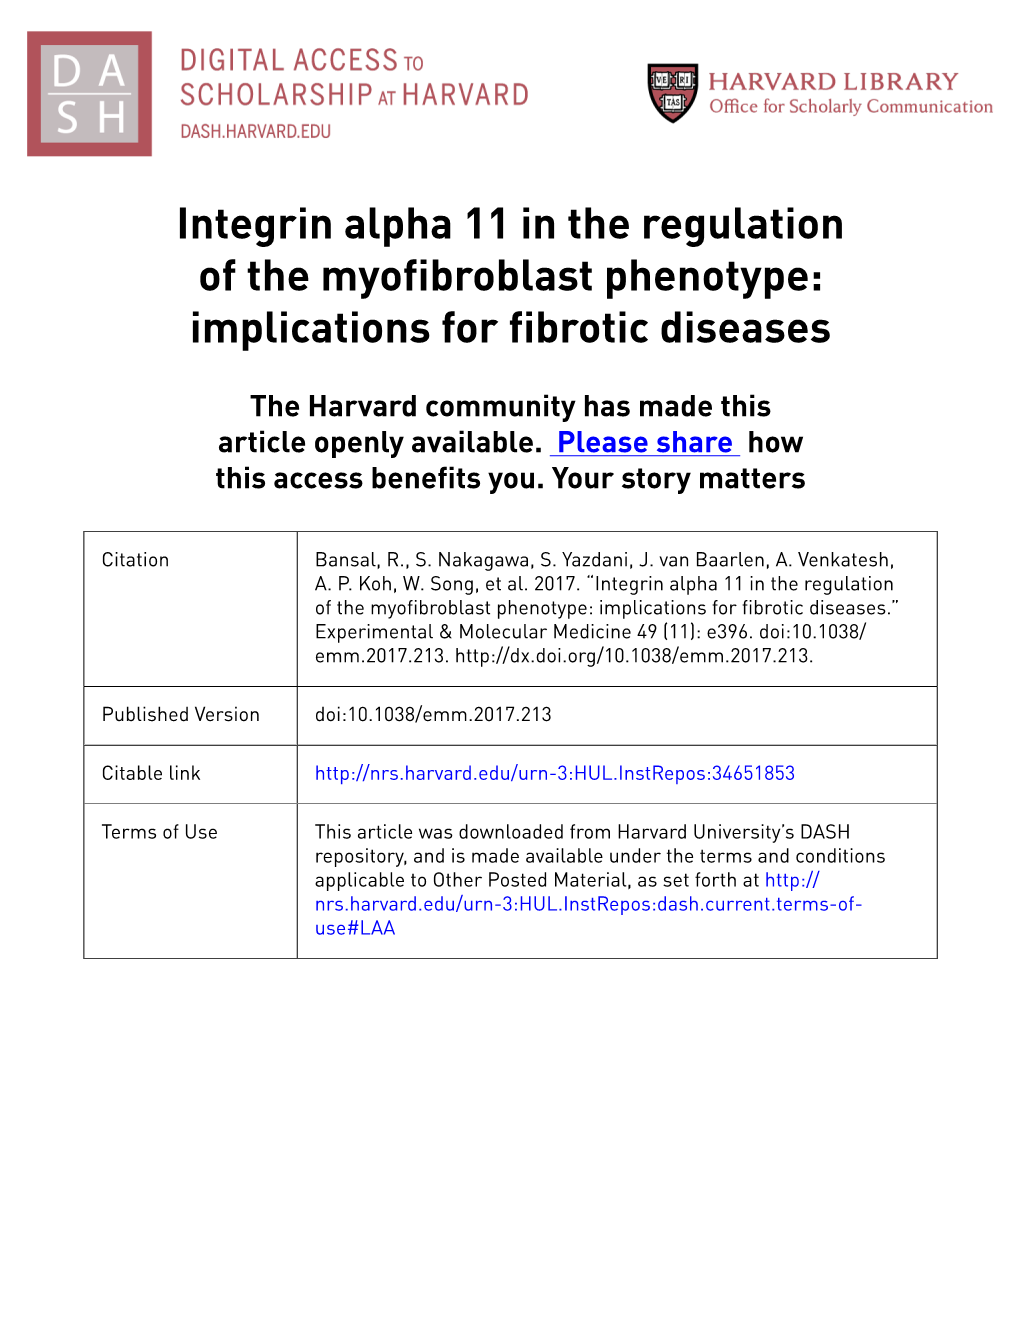 Integrin Alpha 11 in the Regulation of the Myofibroblast Phenotype: Implications for Fibrotic Diseases